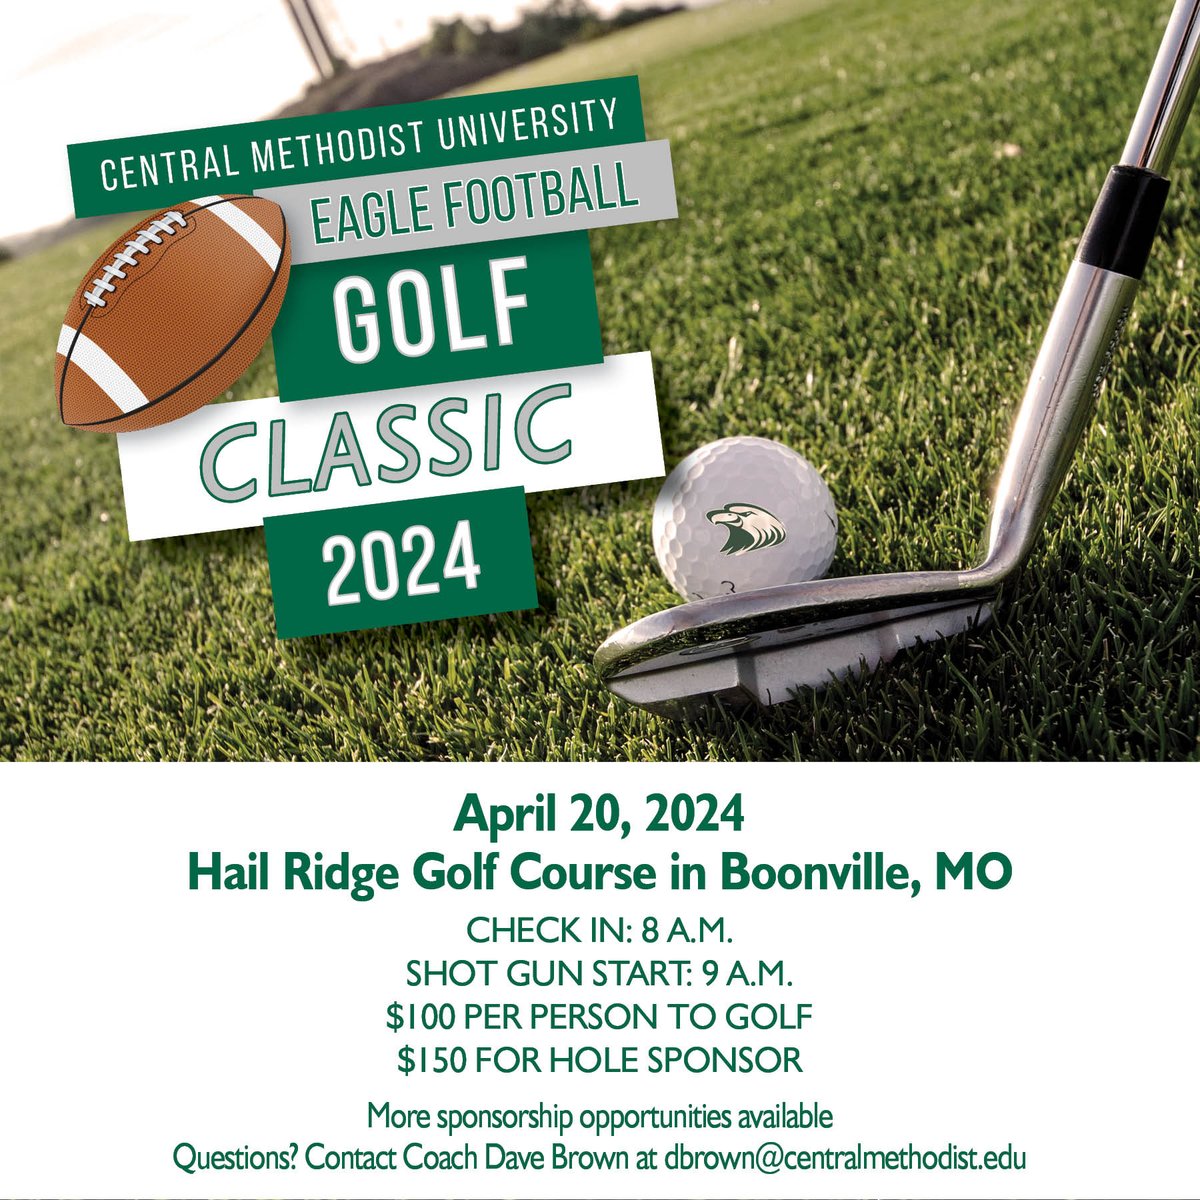 Only 3 more weeks until the First Annual Eagle Football Golf Classic! Spaces still available to play. If you can't make it & would still like to support, we have multiple sponsorship levels. All proceeds will benefit our 2024 roster. Registration at CentralAlumniEvents.com